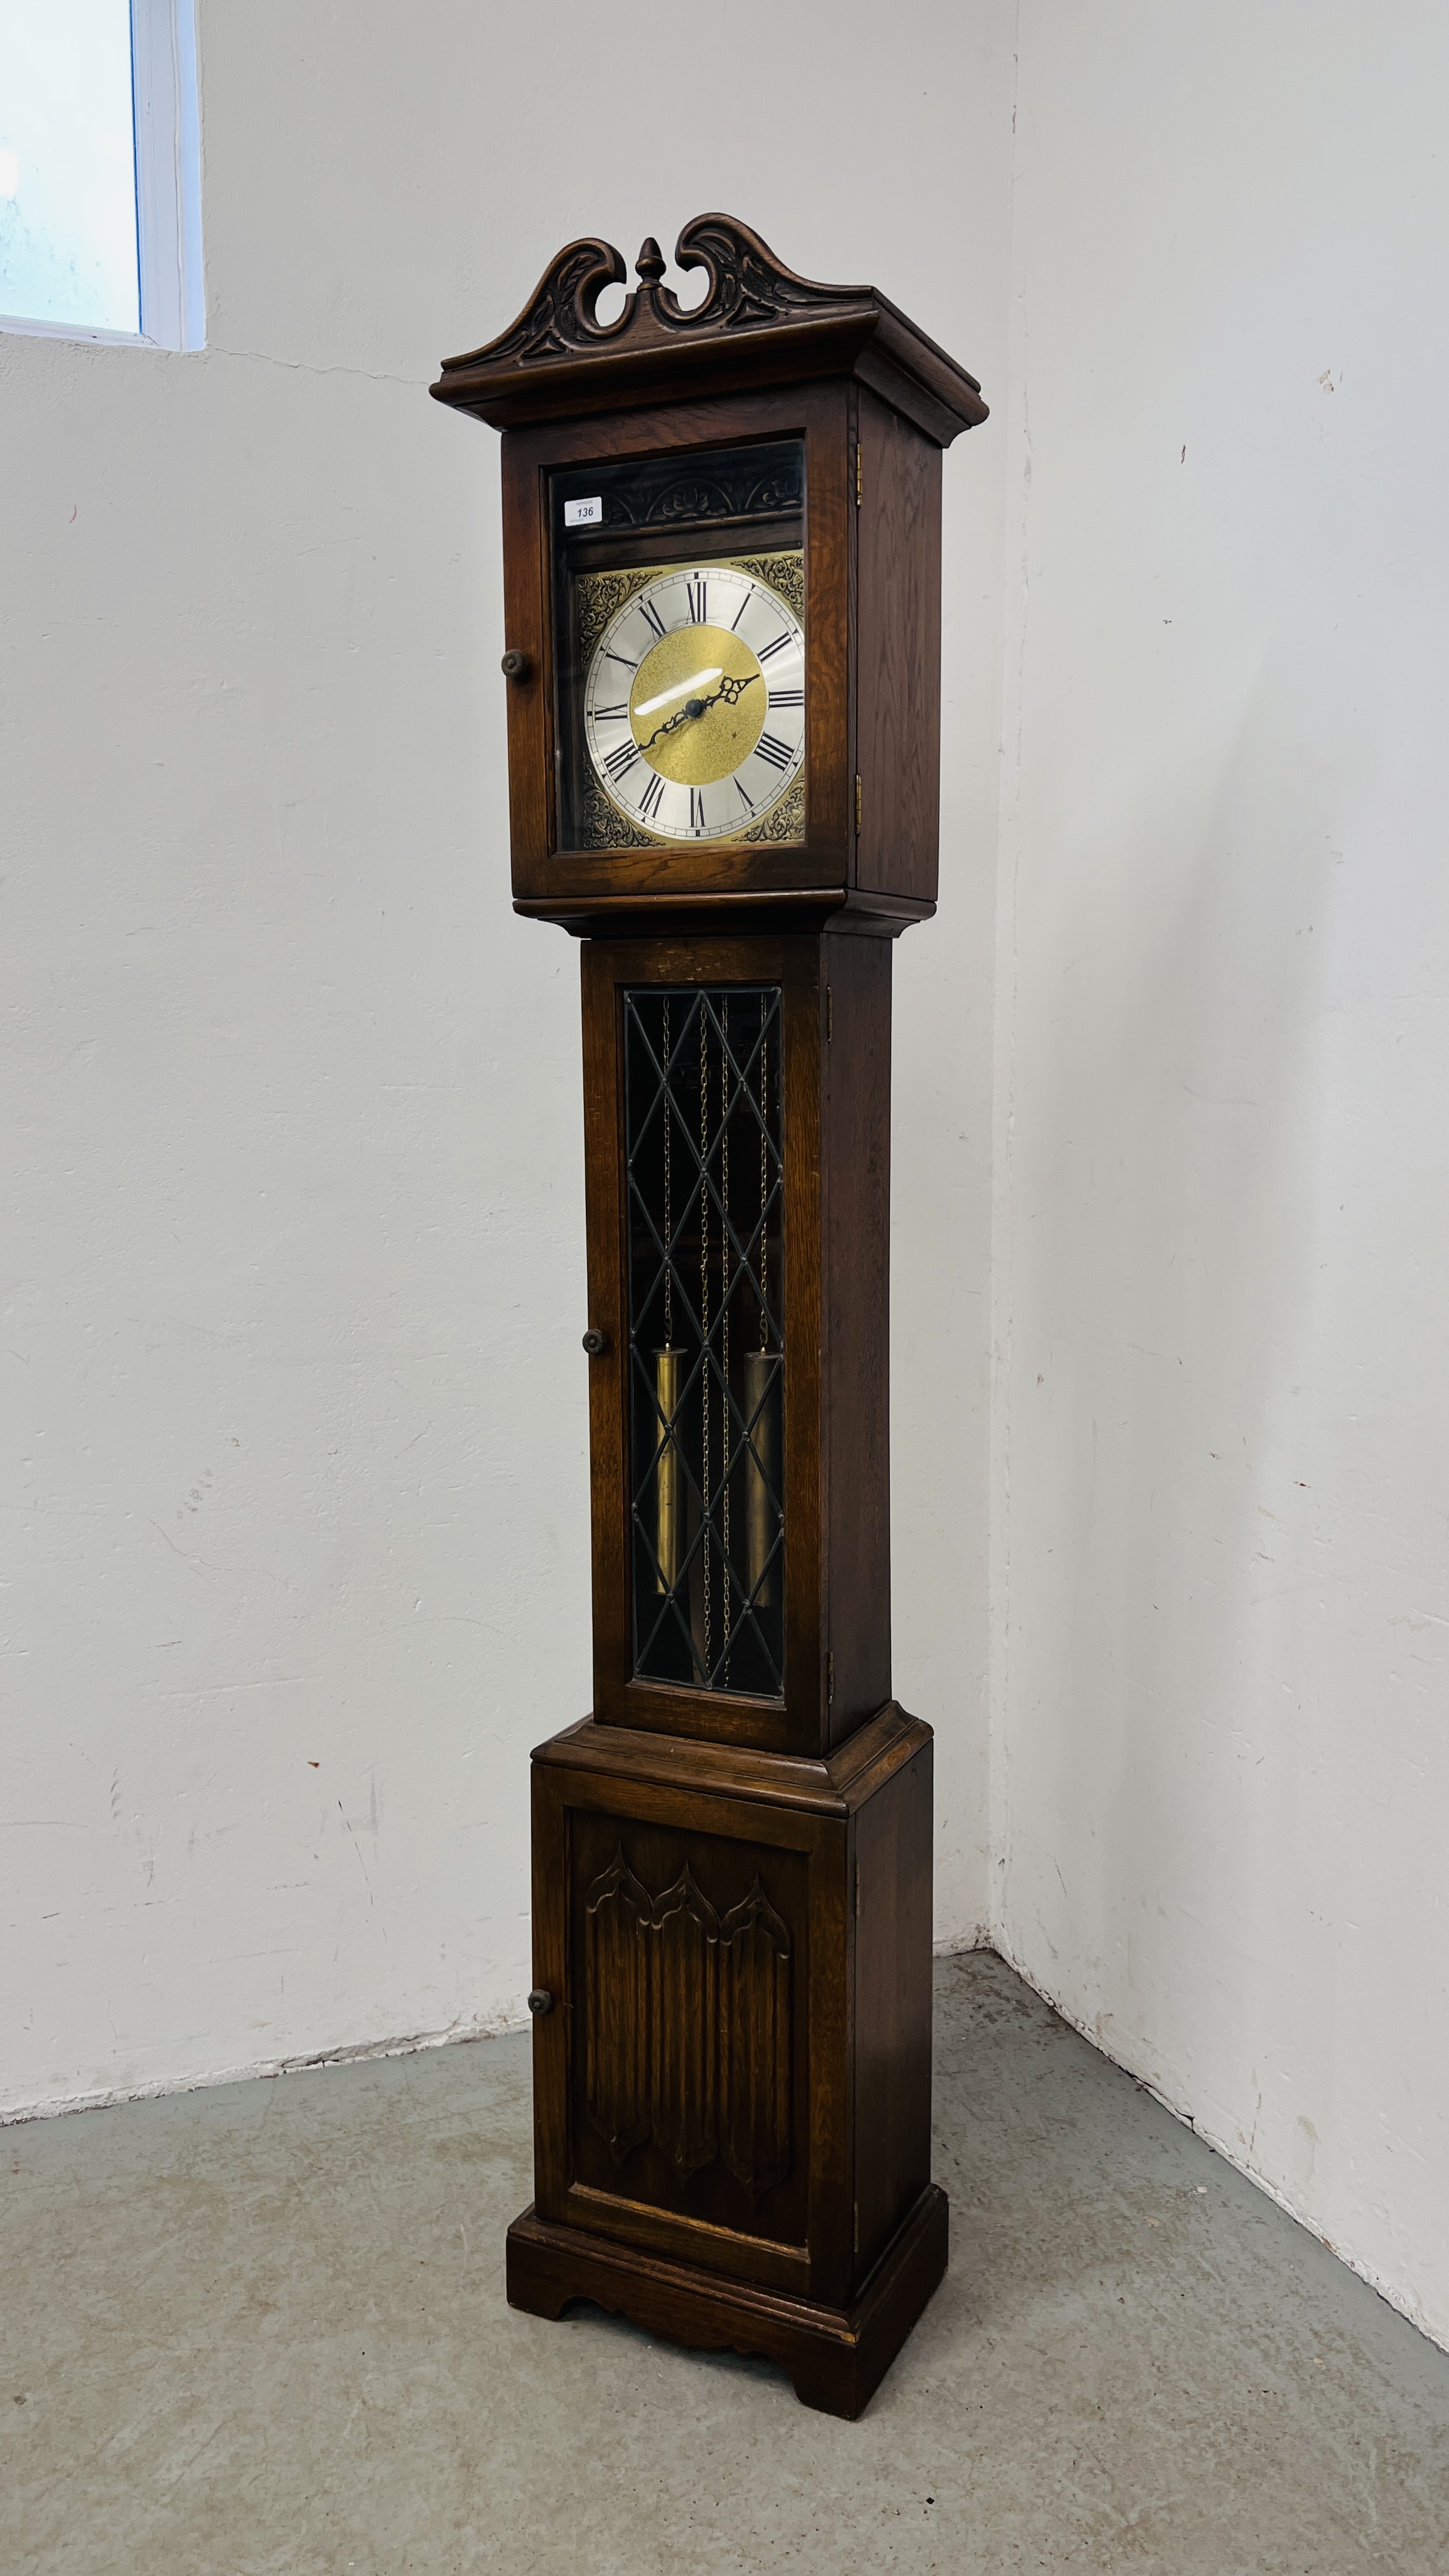 A REPRODUCTION OAK LONG CASE CLOCK WITH LINEN FOLD DETAIL. - Image 2 of 7